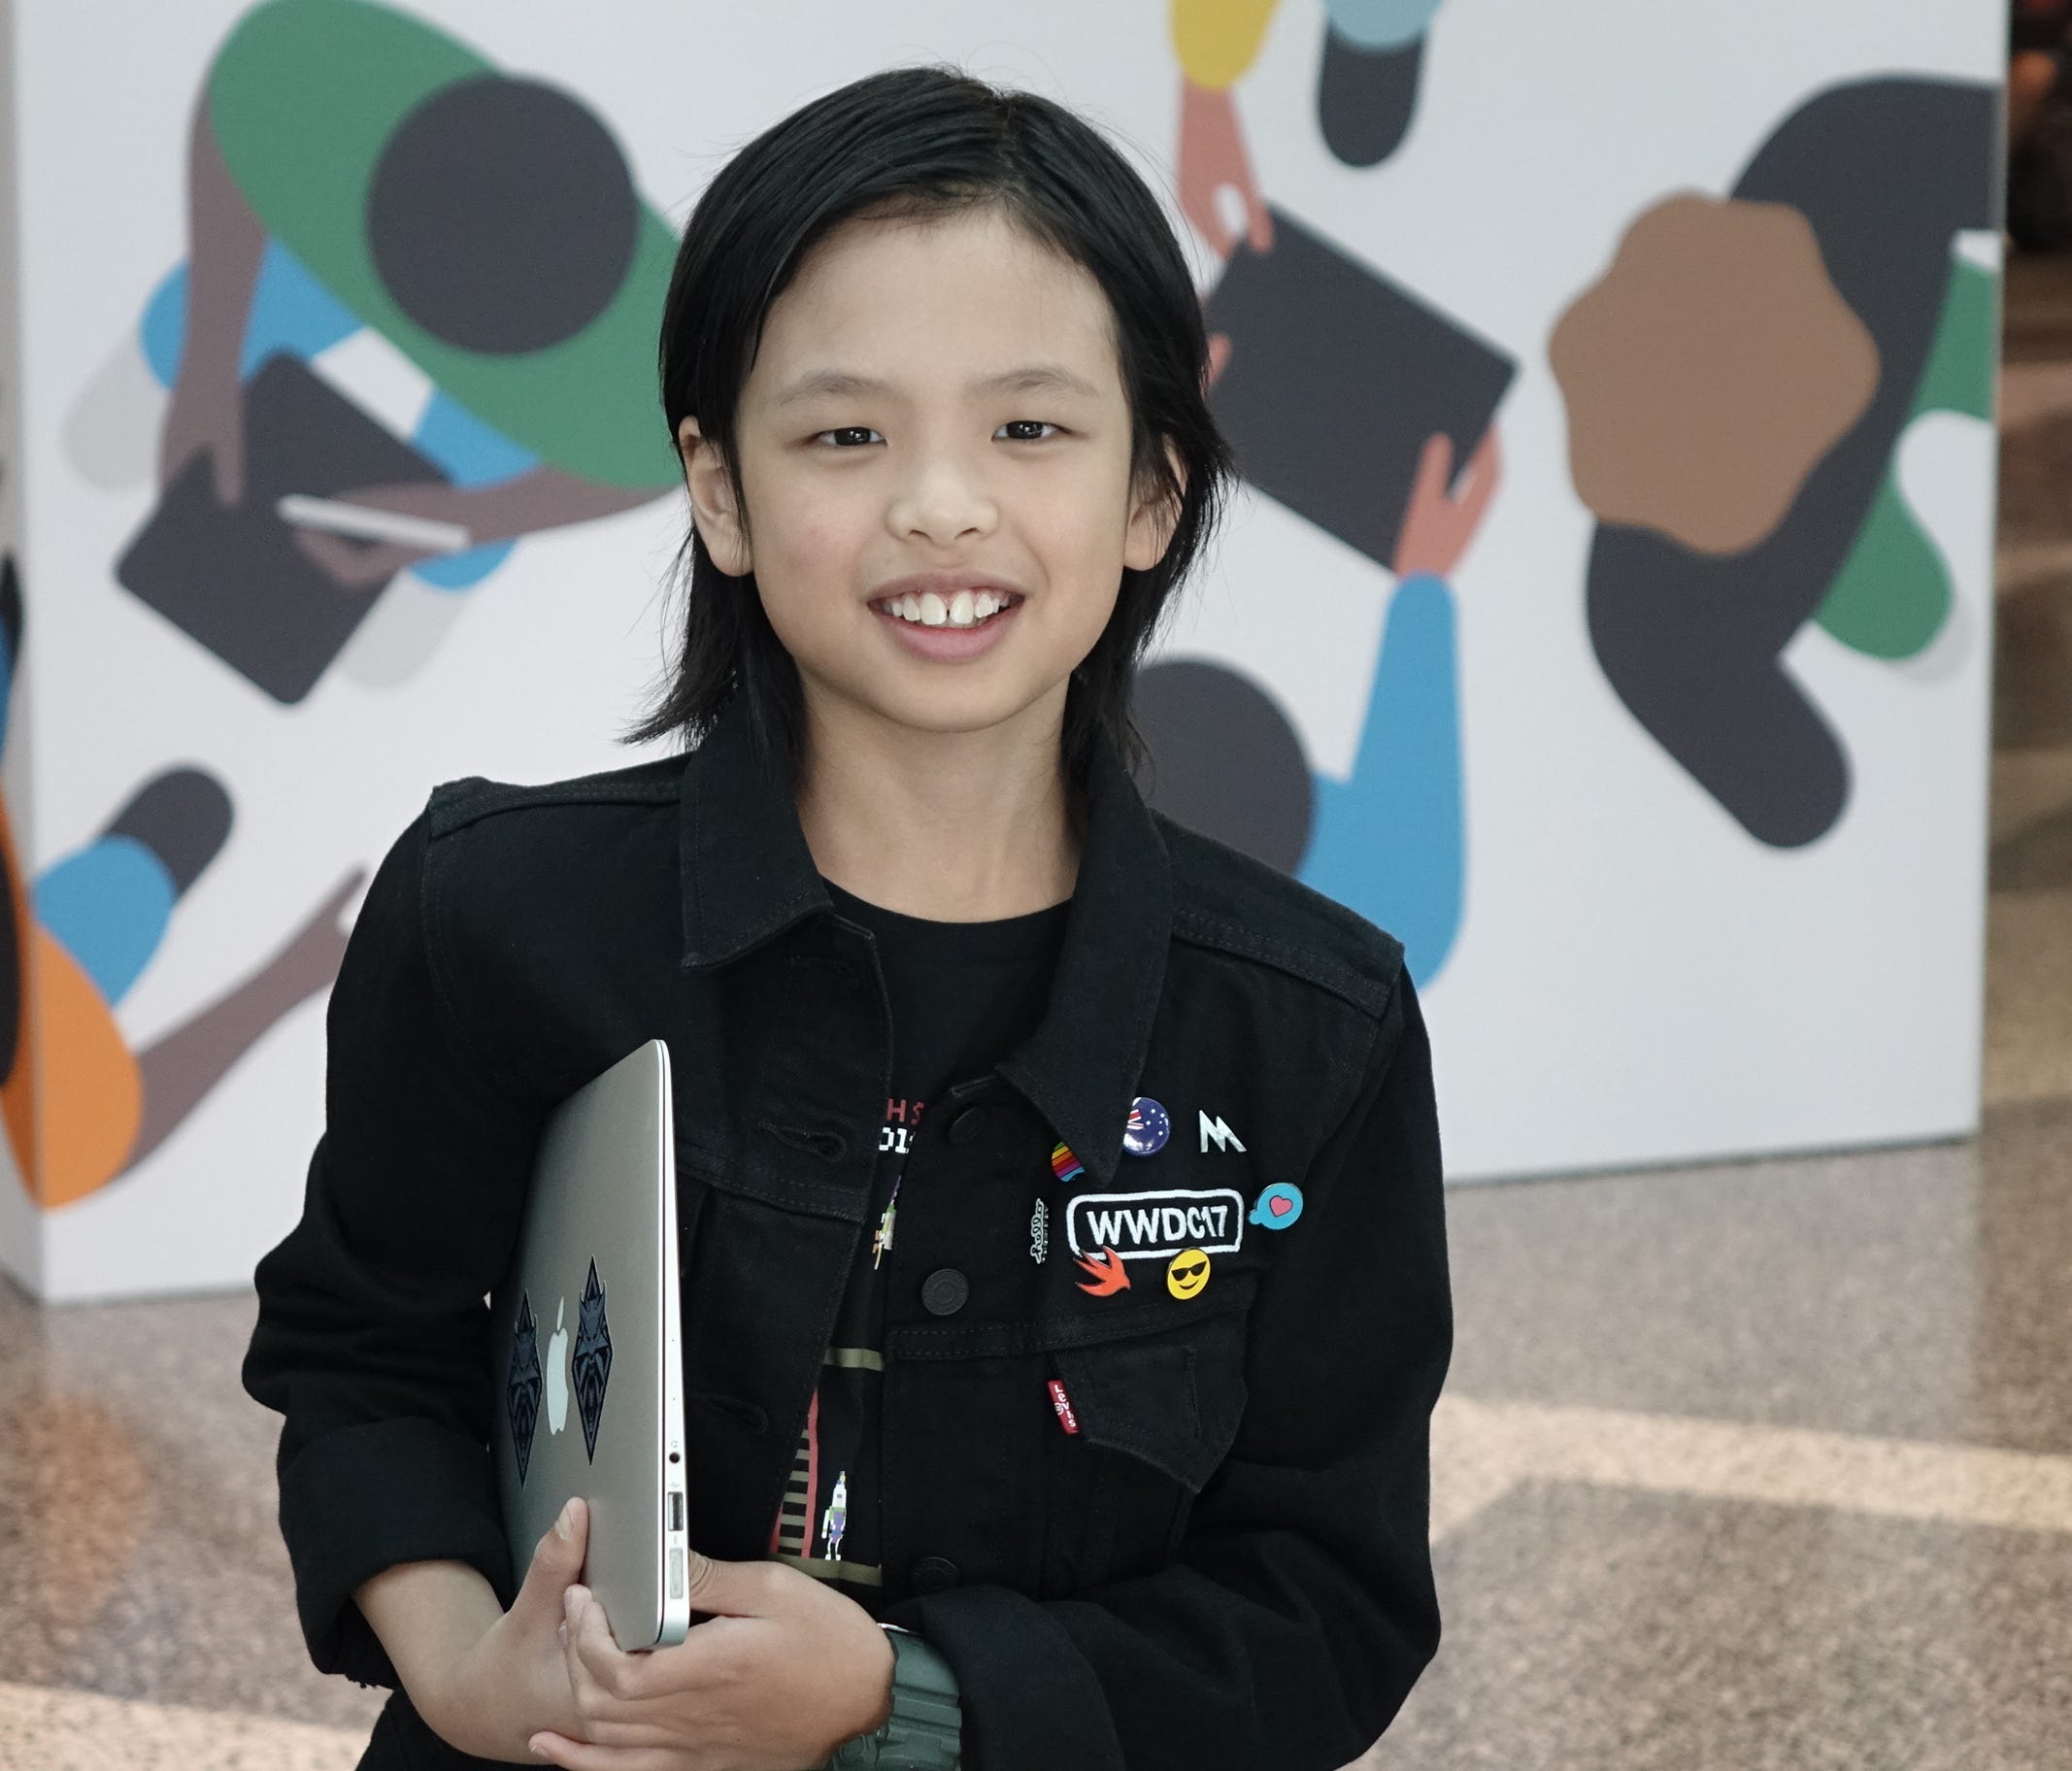 10-year-old app developer Yuma Soerianto at the Apple WWDC conference